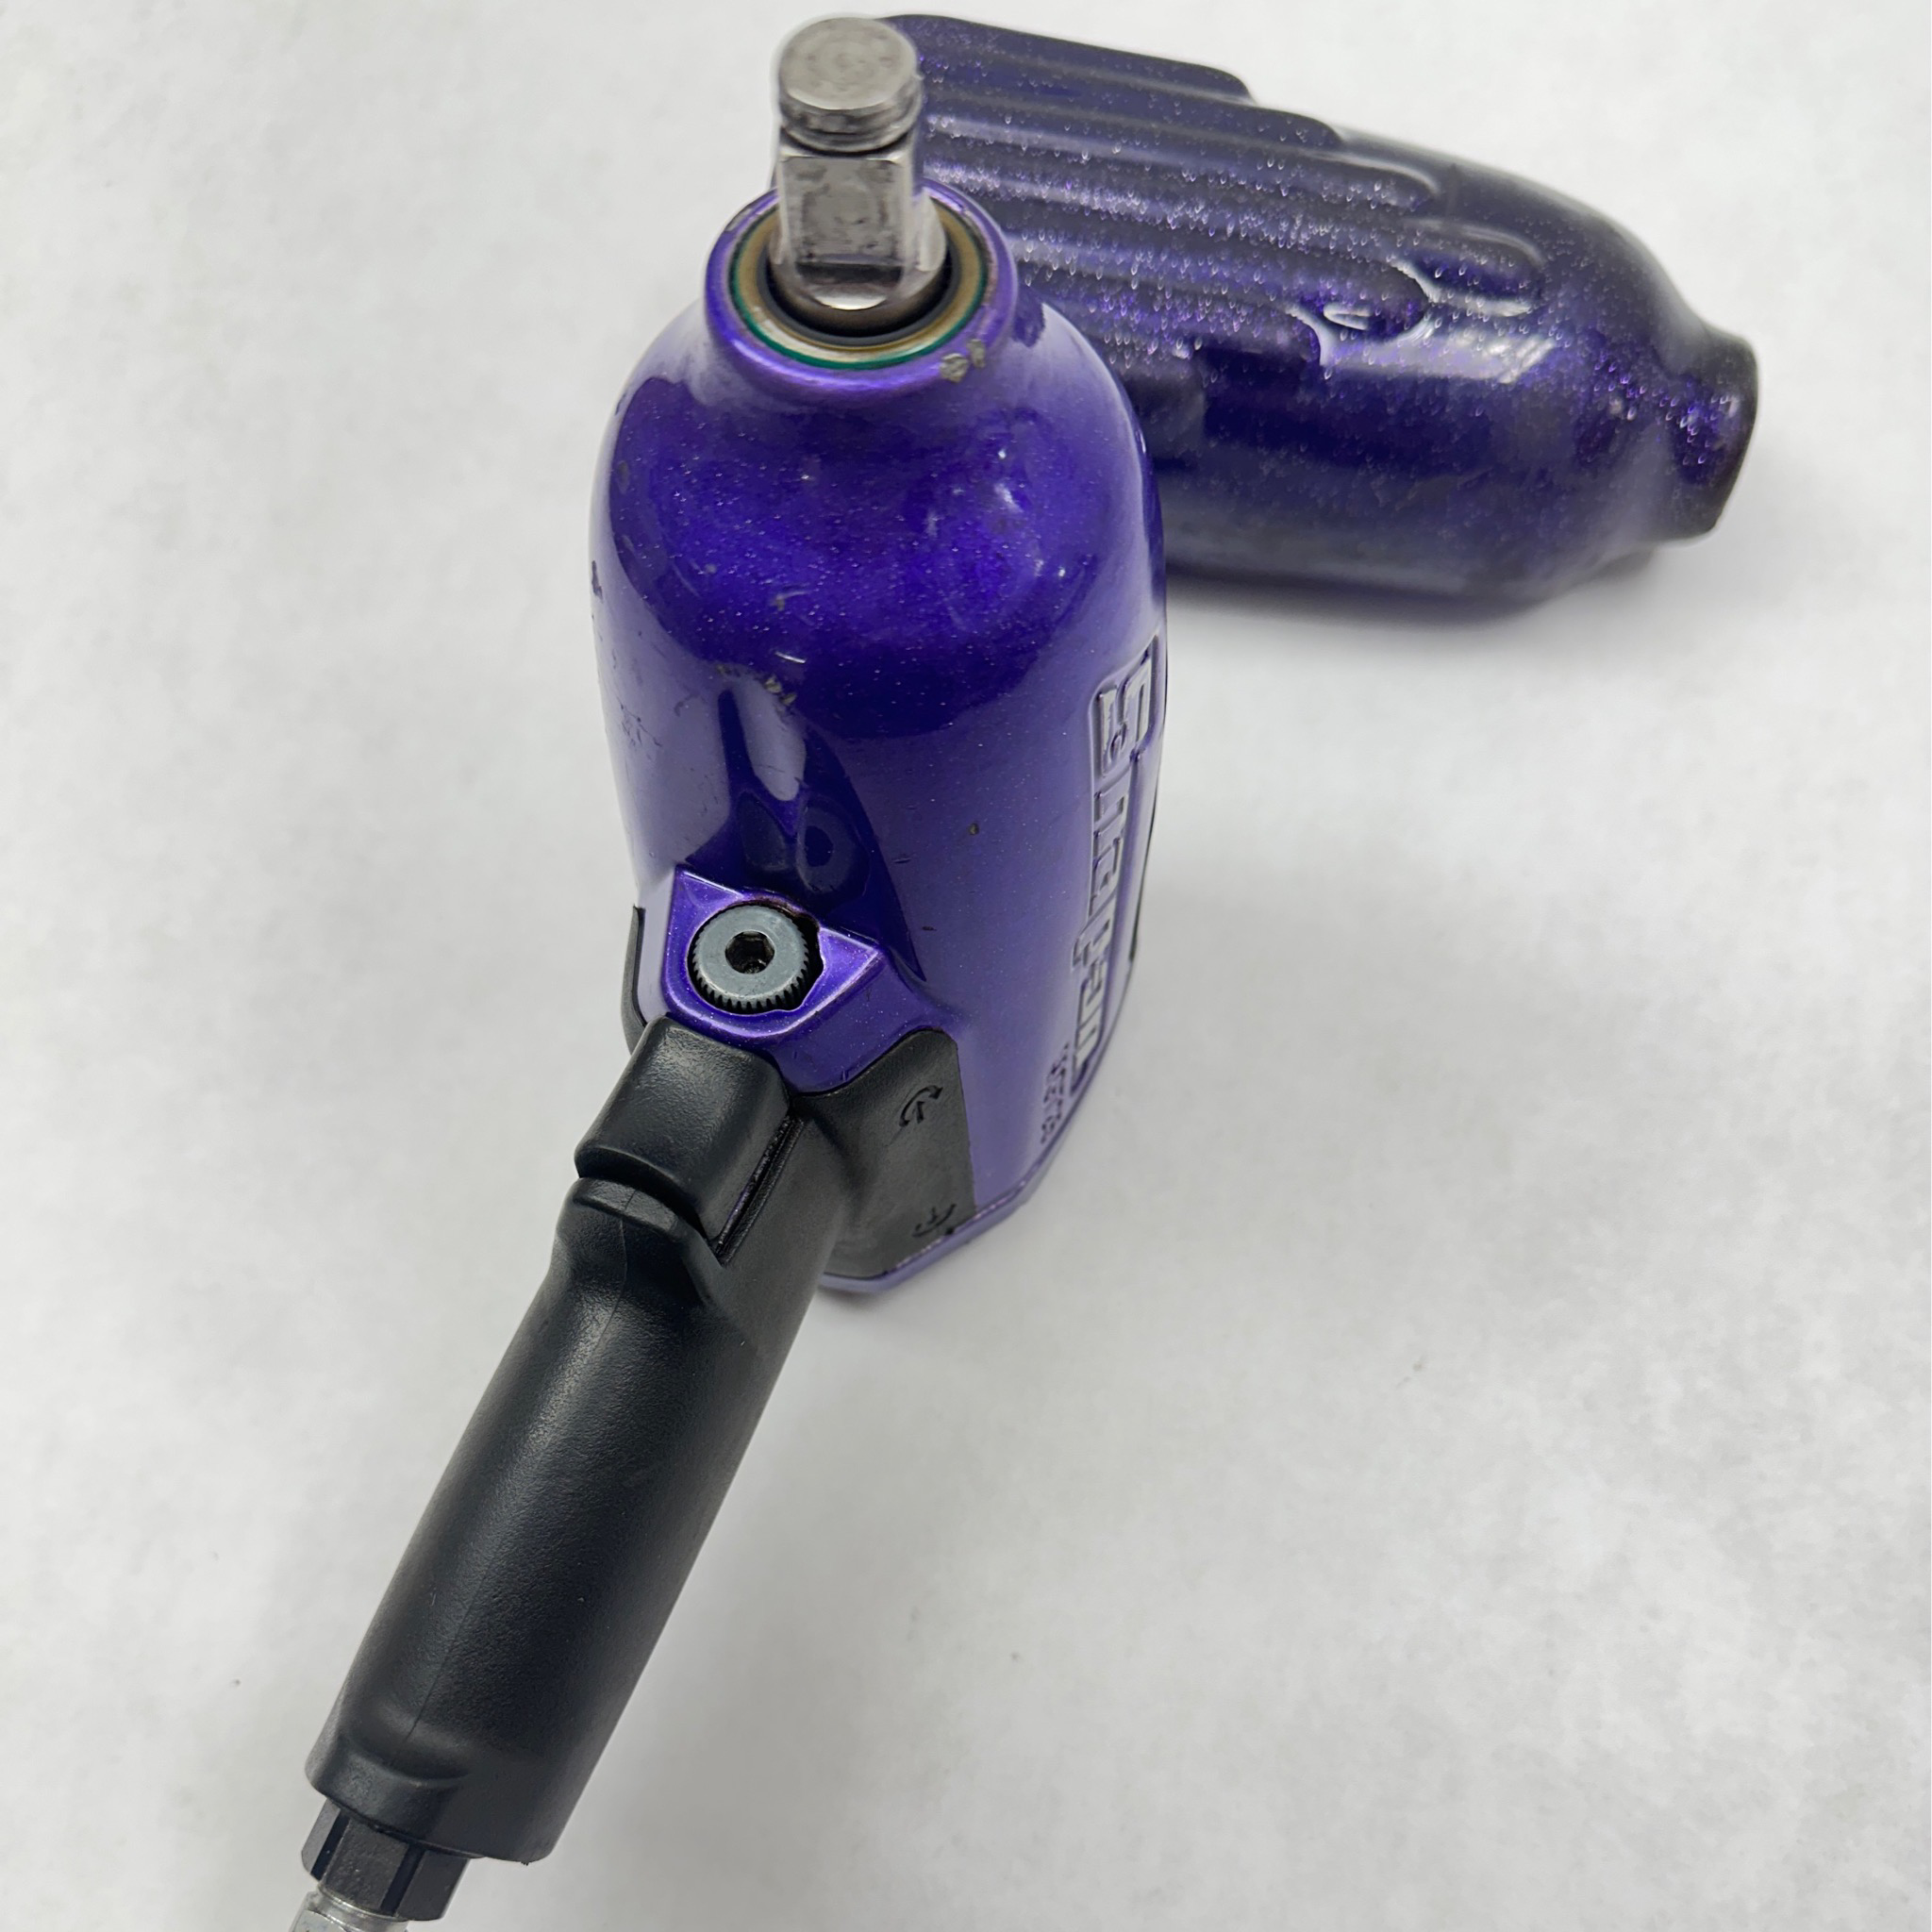 Snap-on Tools - This purple trim reminded us it's #FatTuesday